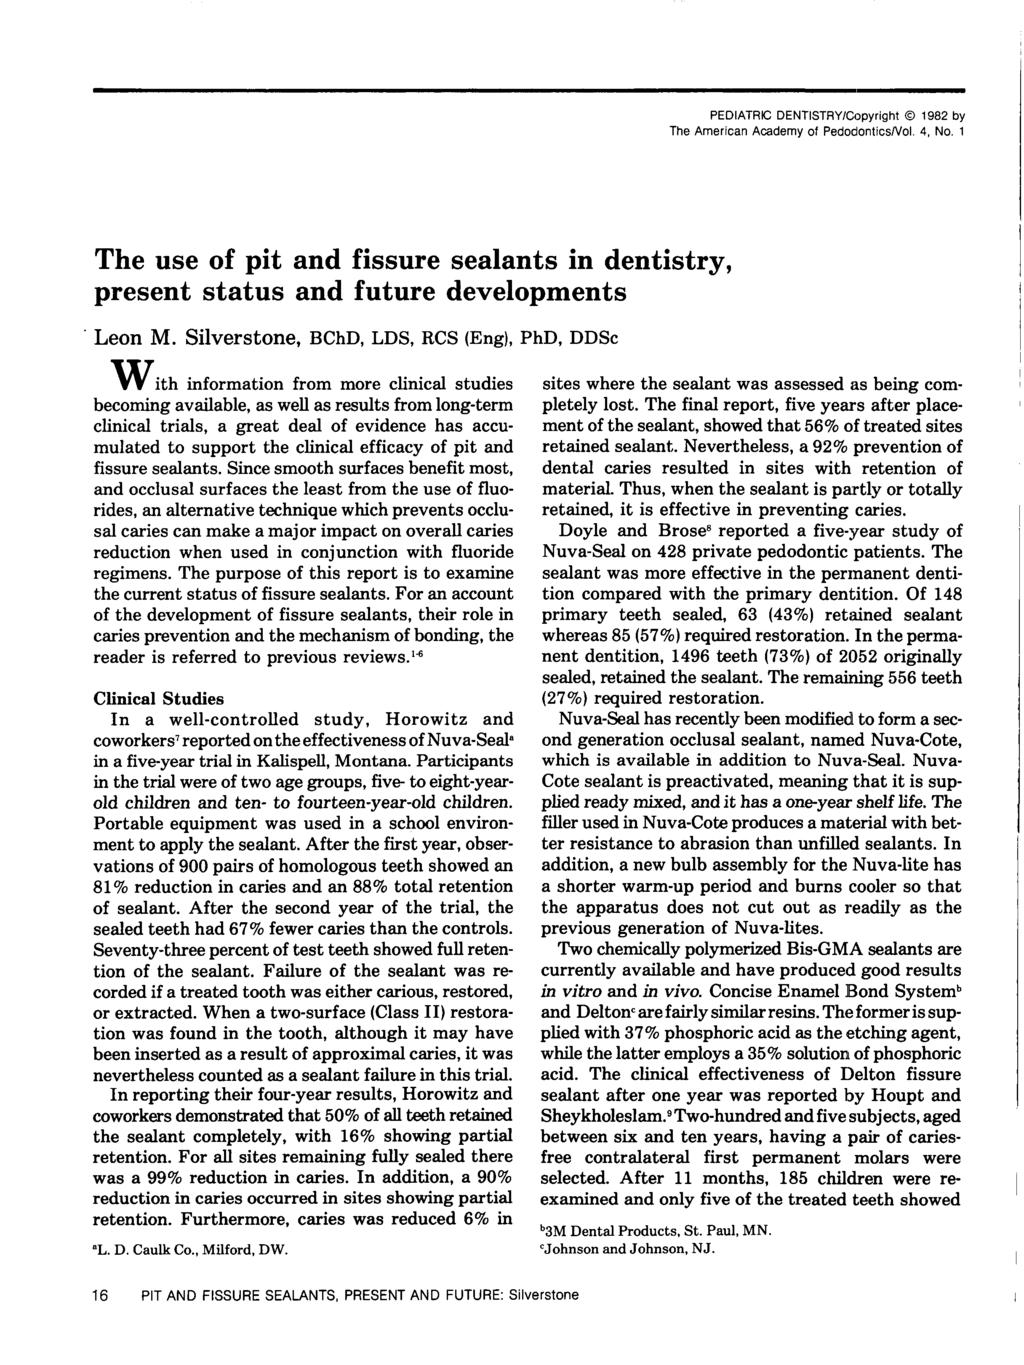 PEDIATRIC DENTISTRY/Copyright 1982 by The American Academy of Pedodontics/Vol. 4, No. 1 The use of pit and fissure sealants in dentistry, present status and future developments Leon M.